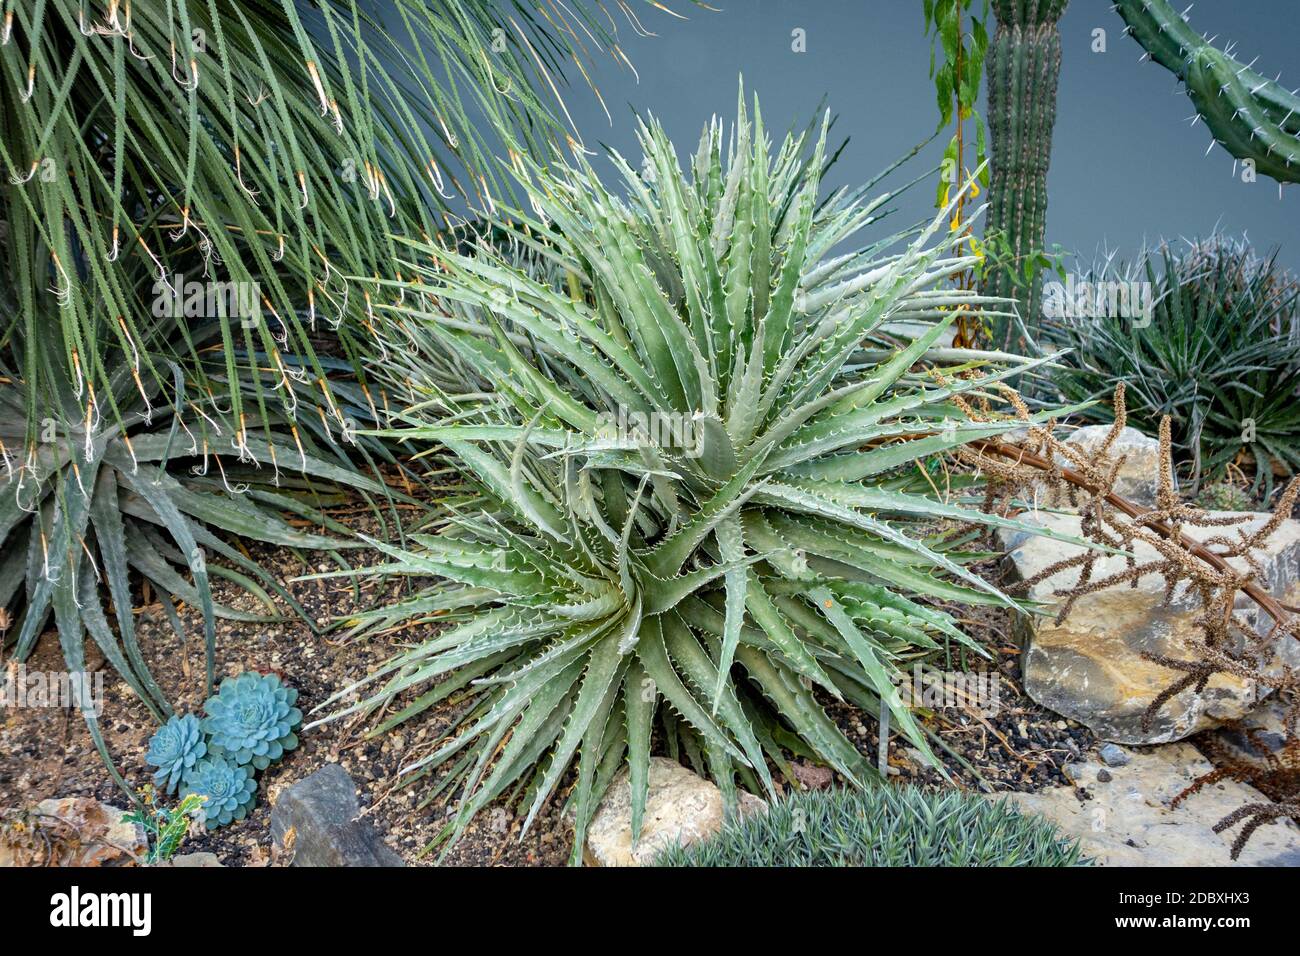 some Hechtia plants in arid ambiance Stock Photo